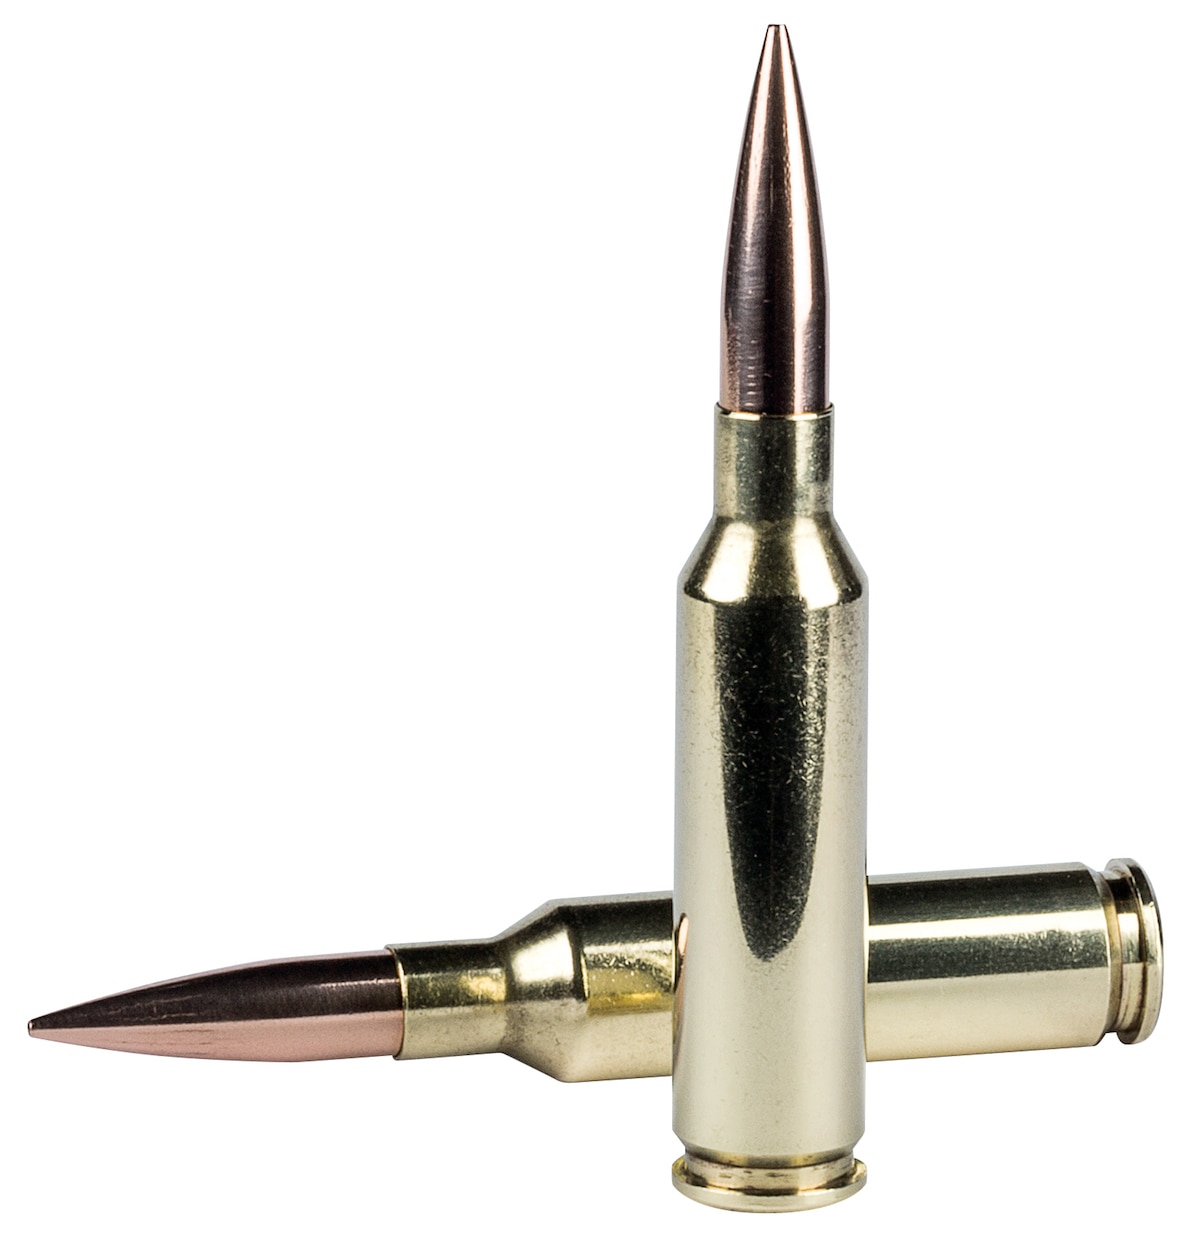 The Gold Medal Berger in 6.5 Creedmoor. (Photo: Federal Premium)